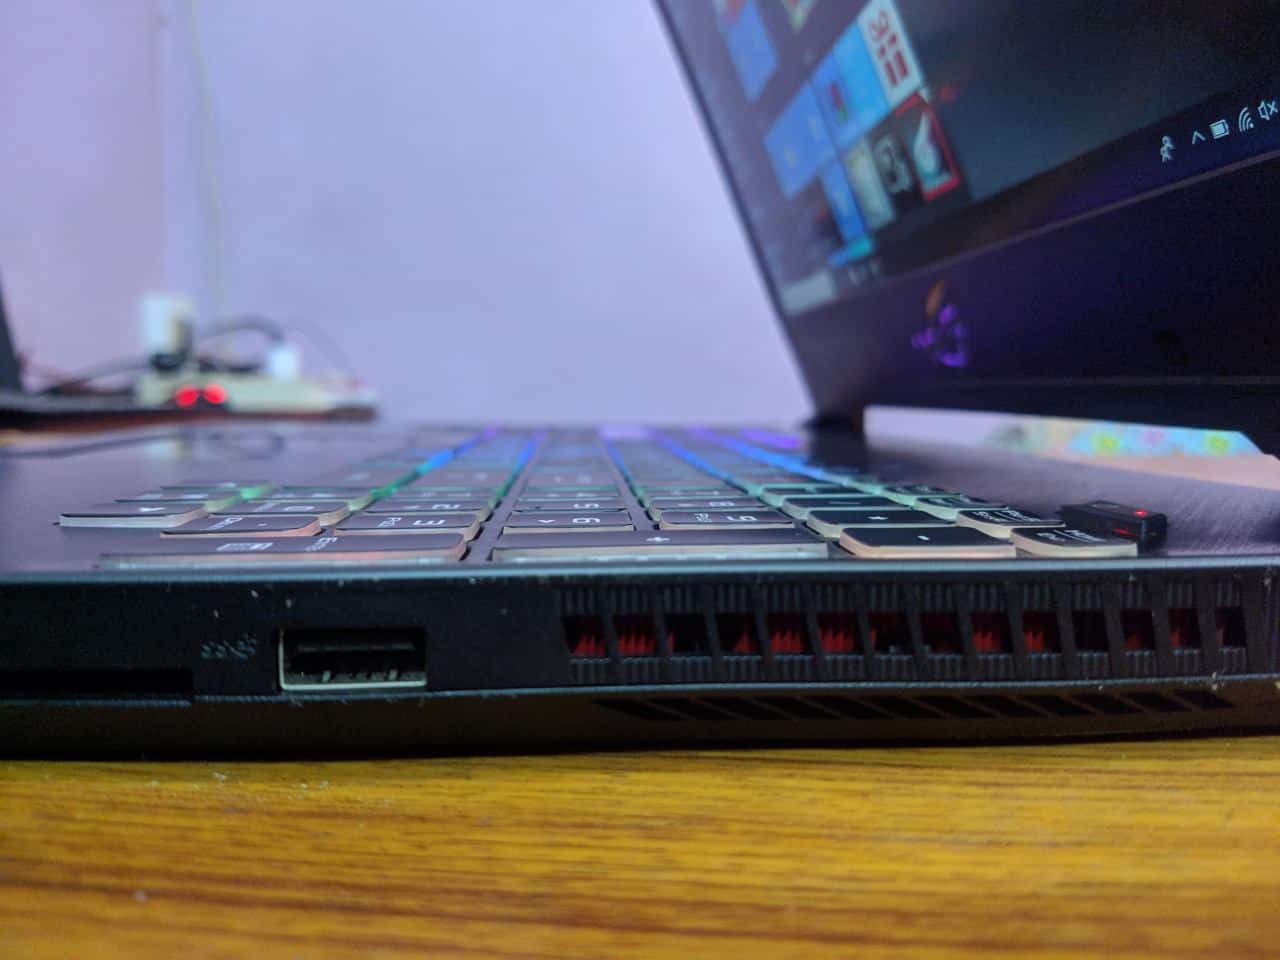 Asus ROG Strix Hero II: Ideal gaming laptop while on the move? - 10